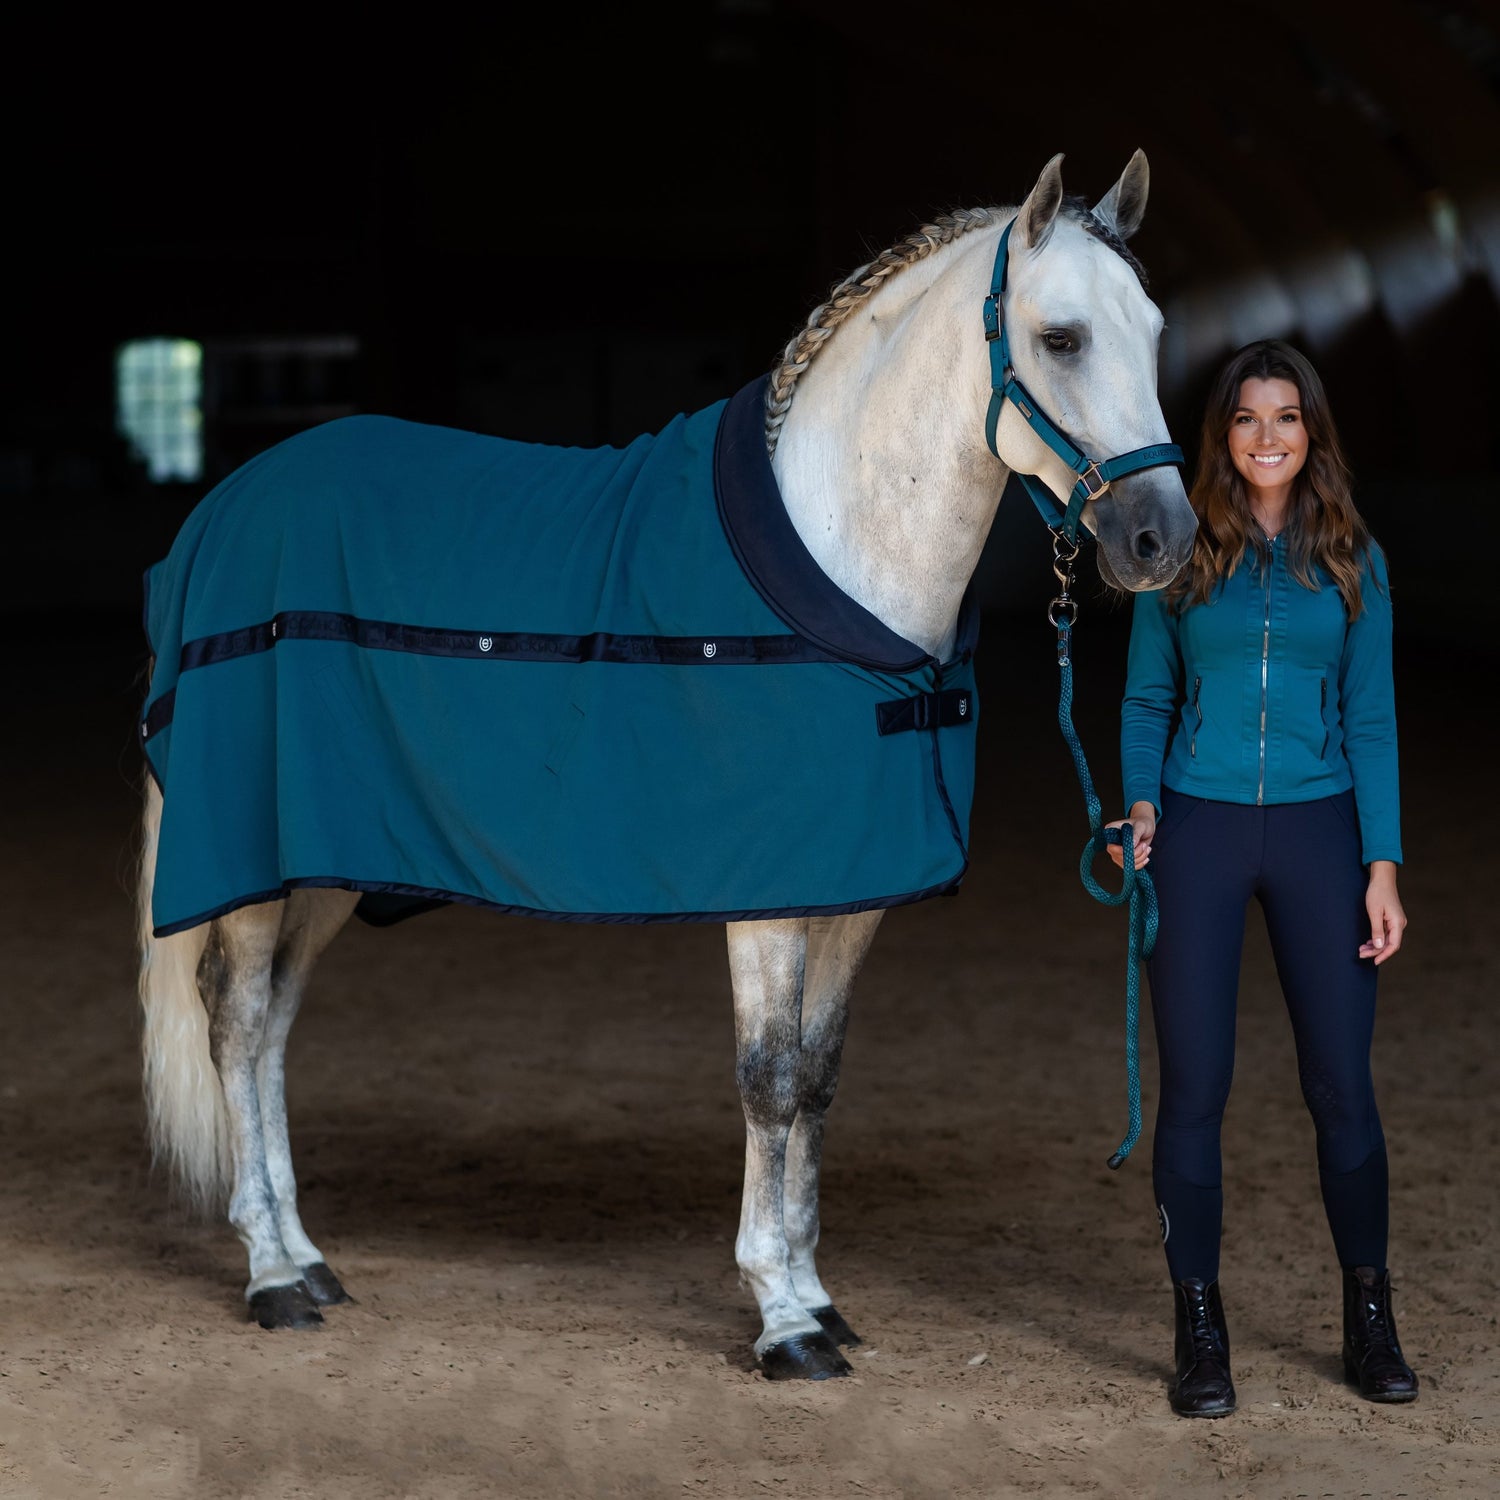 What is a horse blanket and why do we use them?